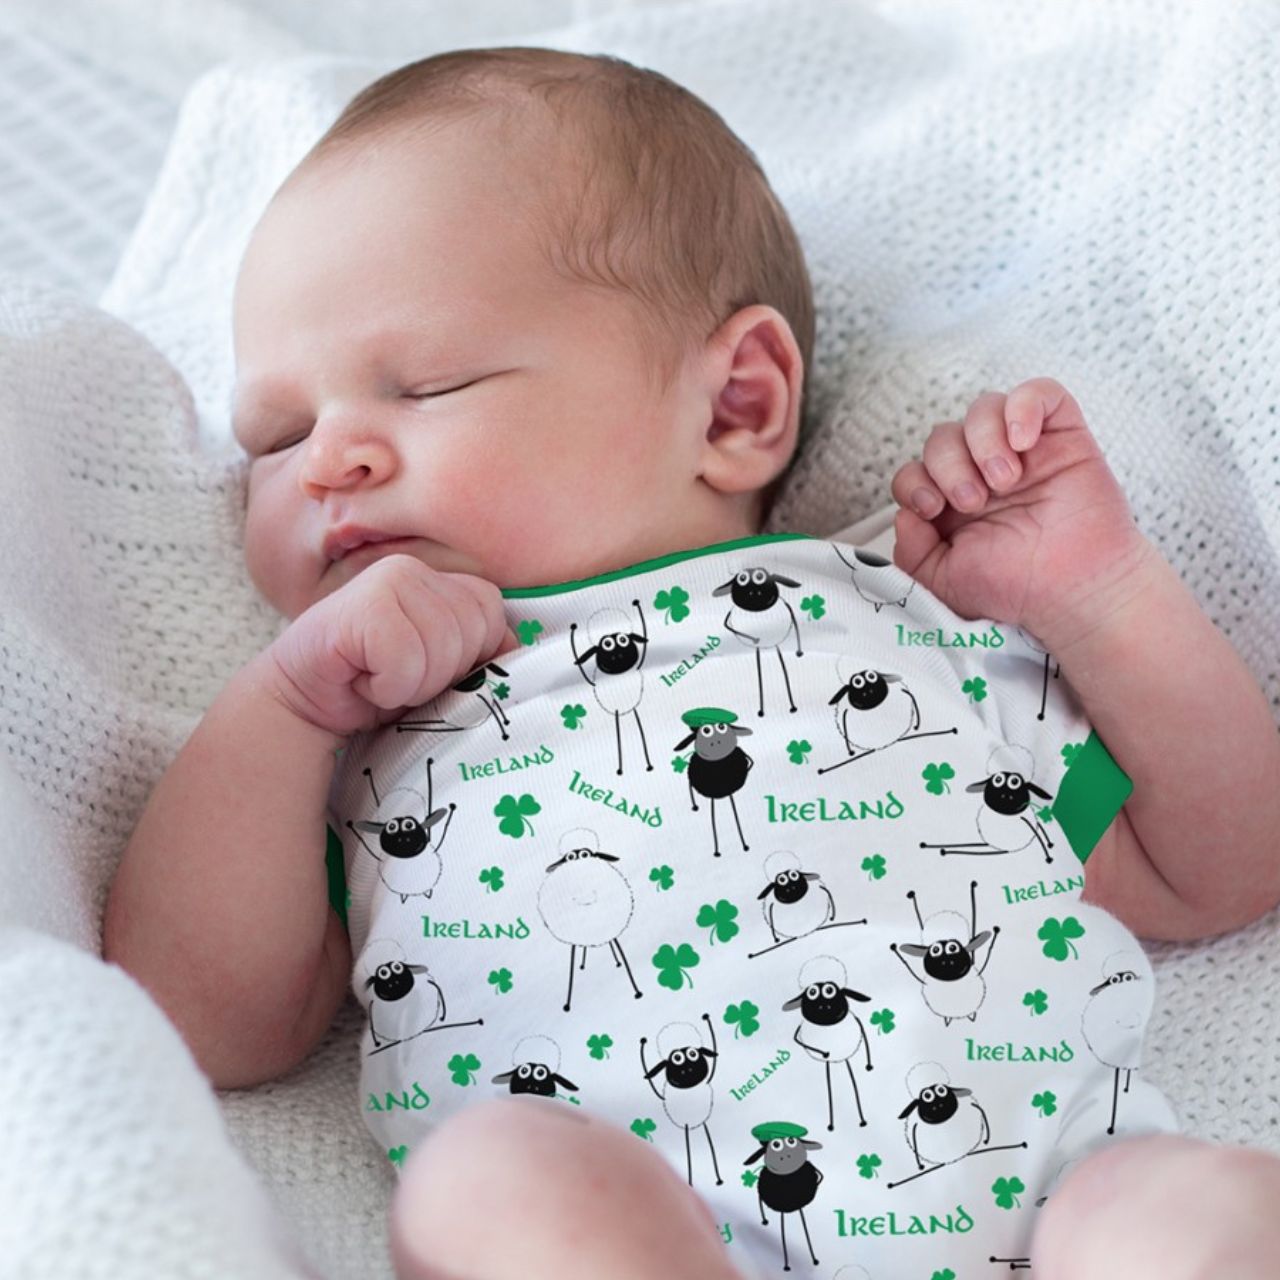 White & Green Overall Printed Sheep Baby Vest  This white and green baby vest is part of the Traditional Craft Official Collection. This white cotton vest has an emerald green trim on the neck, sleeves and bottom. The vest is designed with an over all print of sheep, shamrocks & Ireland logo's from the Flaherty Flock range.